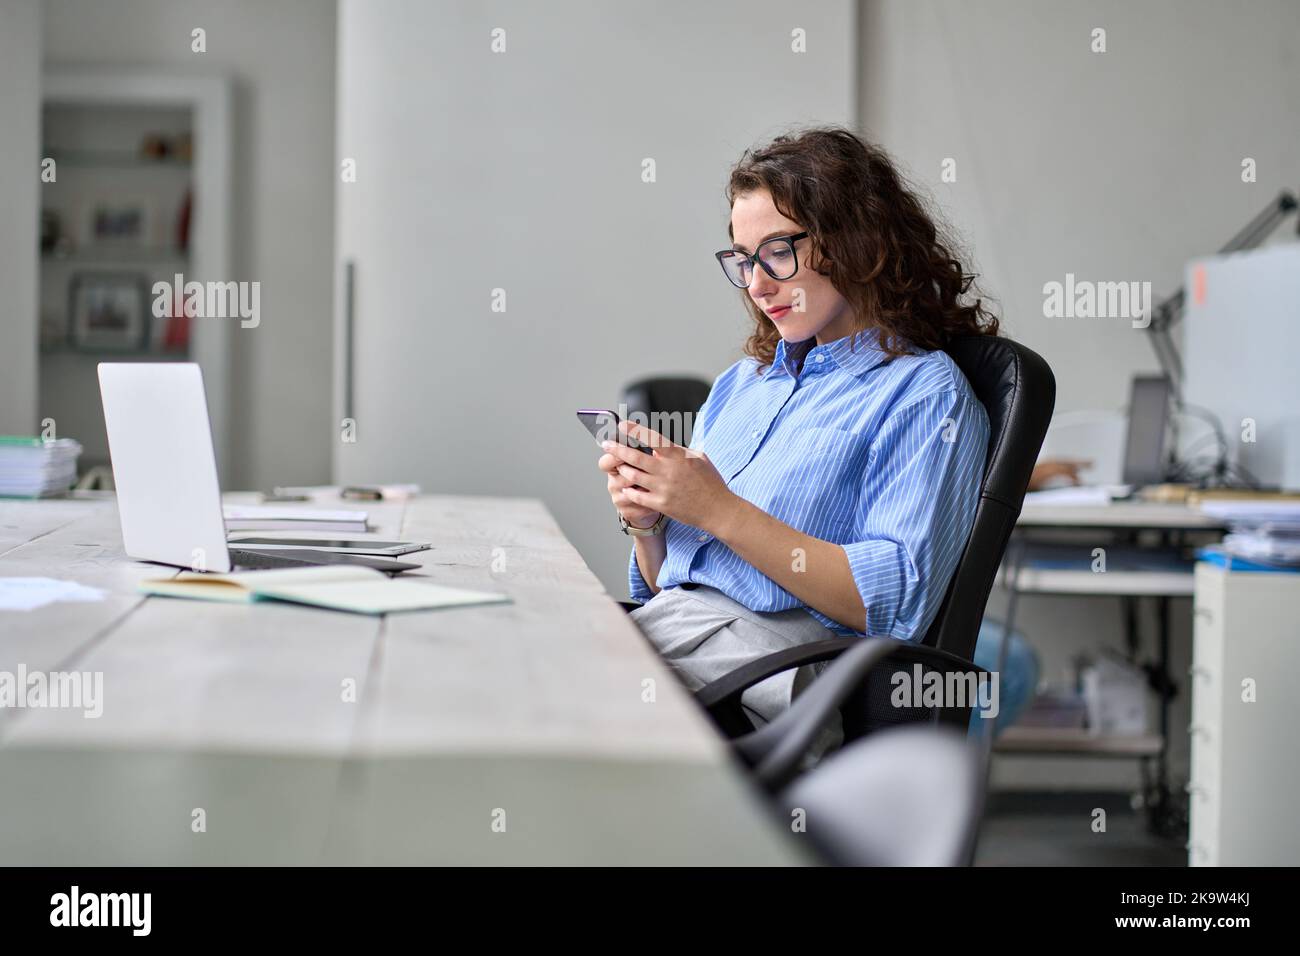 Young business woman using smartphone working in office sitting at desk. Stock Photo